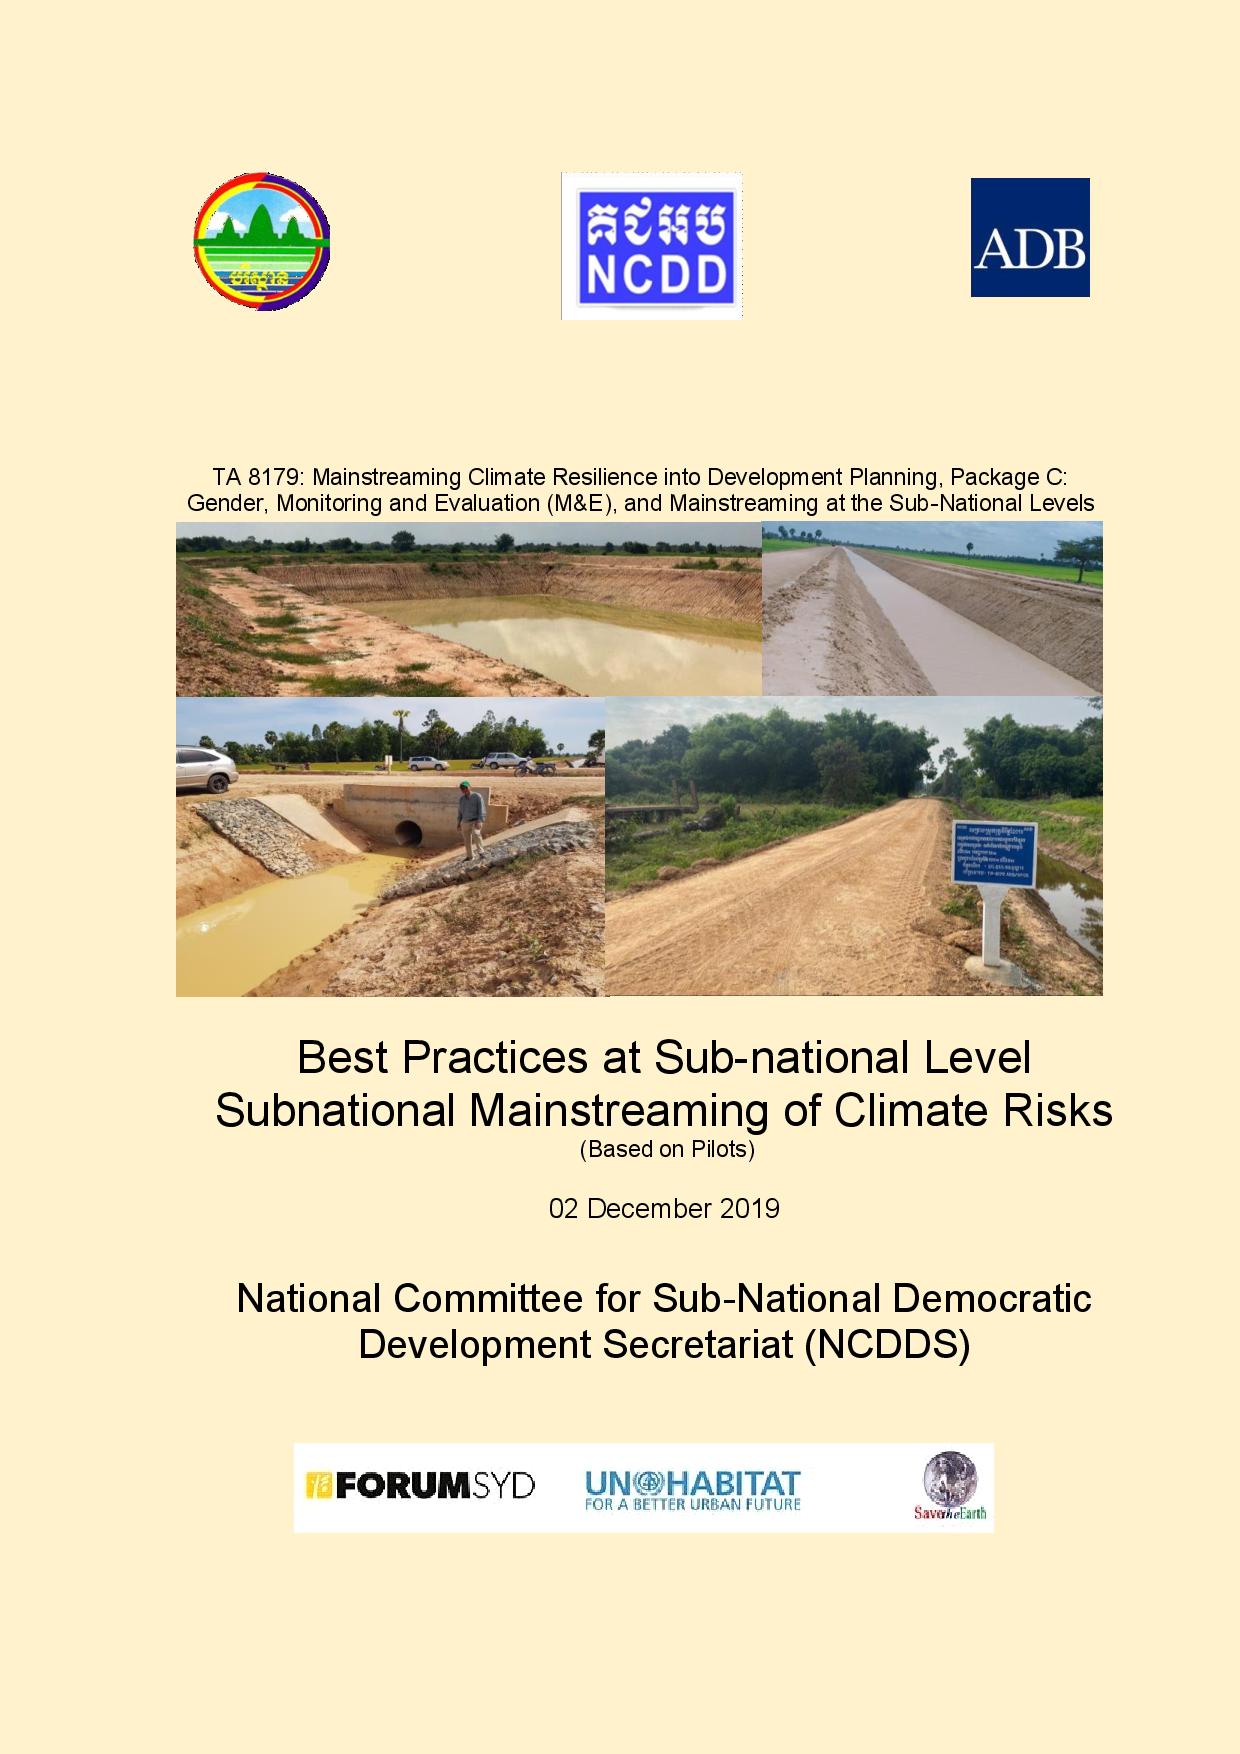 Best Practices at Sub-national Level Subnational Mainstreaming of Climate Risks